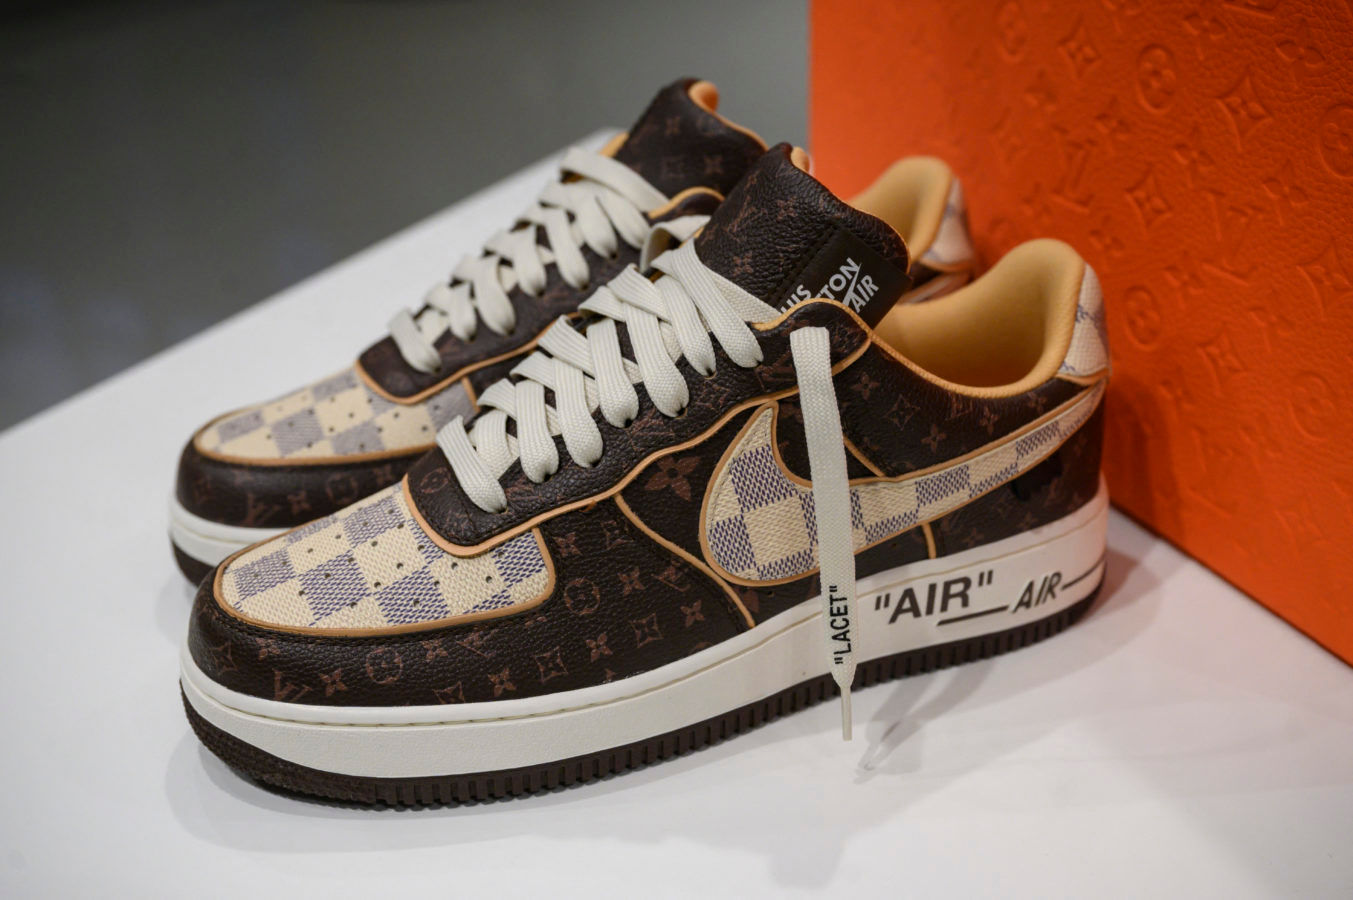 200 pairs of Virgil Abloh shoes fetch $25 million at Sotheby’s auction